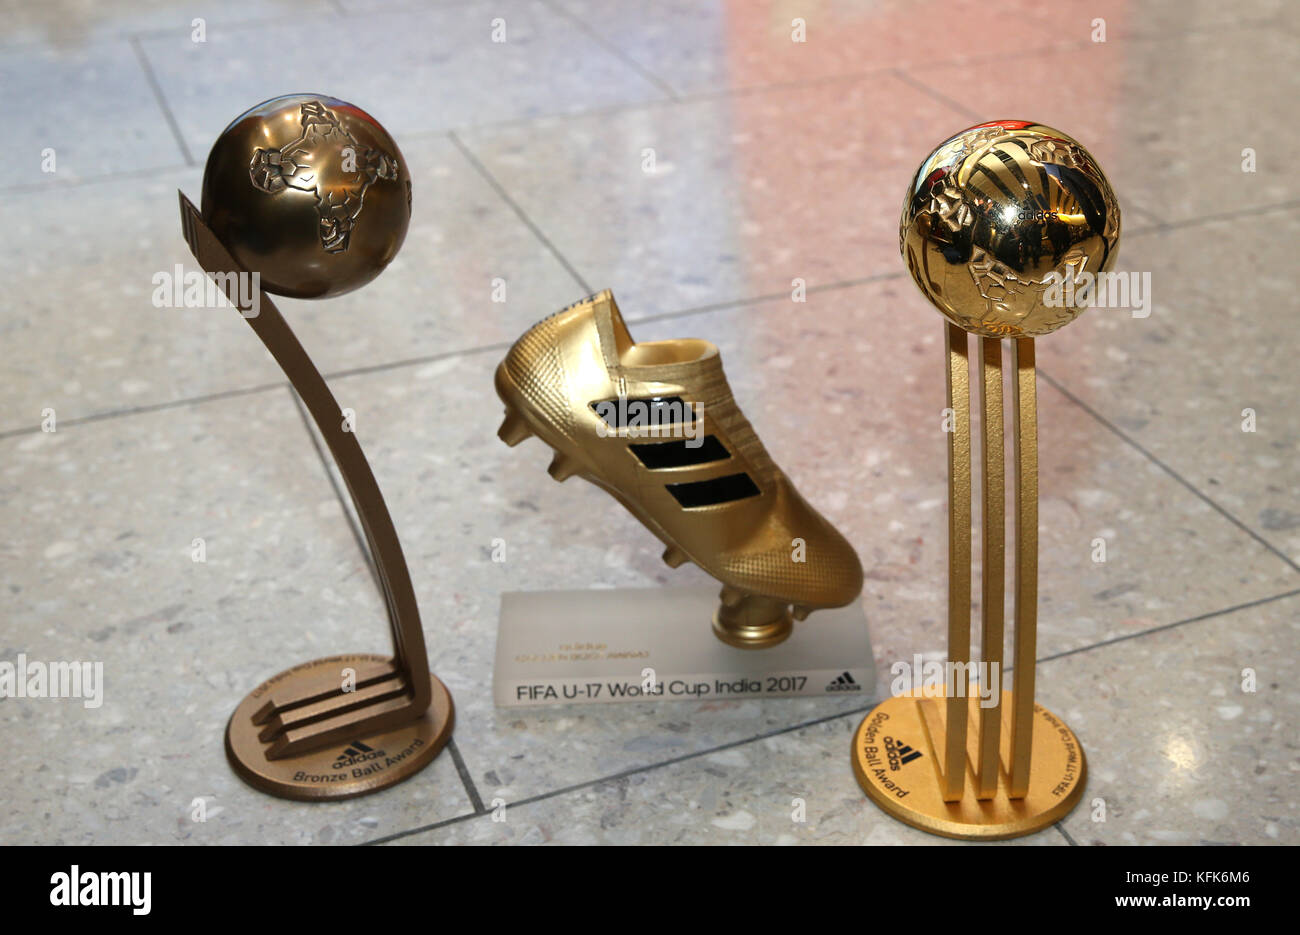 A general view of Rhian Brewster's Adidas Bronze Ball trophy (lef), Rhian  Brewster's Adidas Golden Boot trophy and Phil Foden's Adidas Golden ball  trophy as the Under-17 World Cup winning side arrive